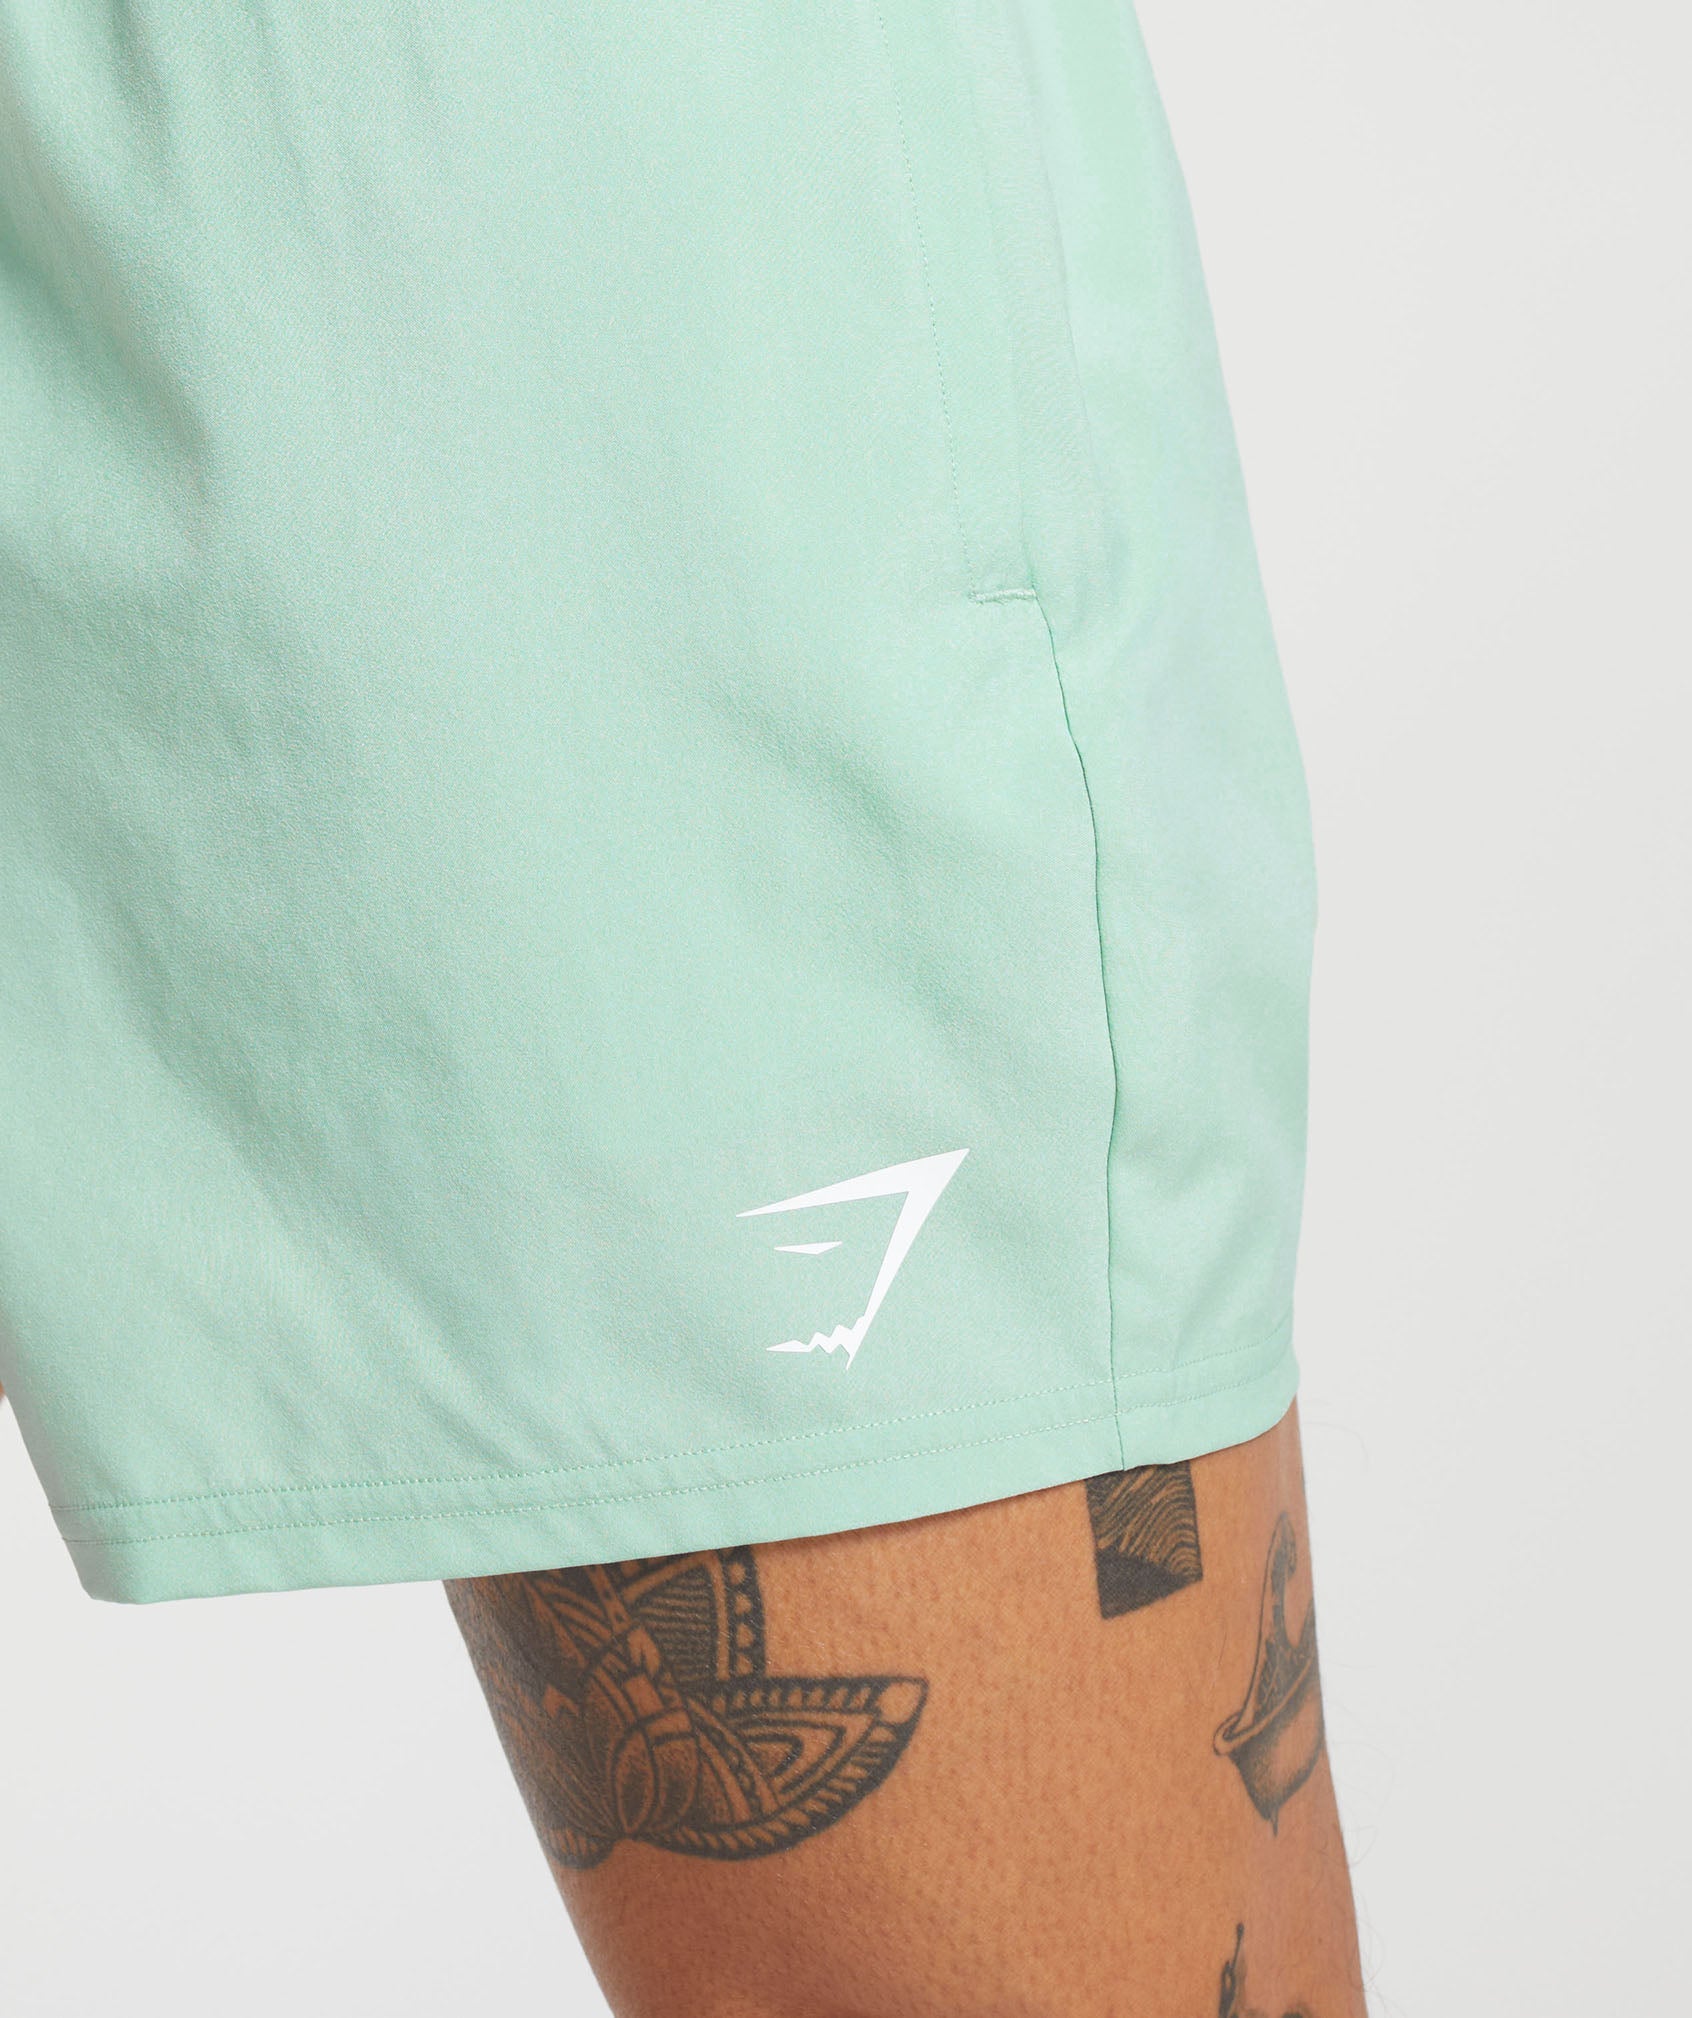 Arrival 5" Shorts in Lido Green - view 6